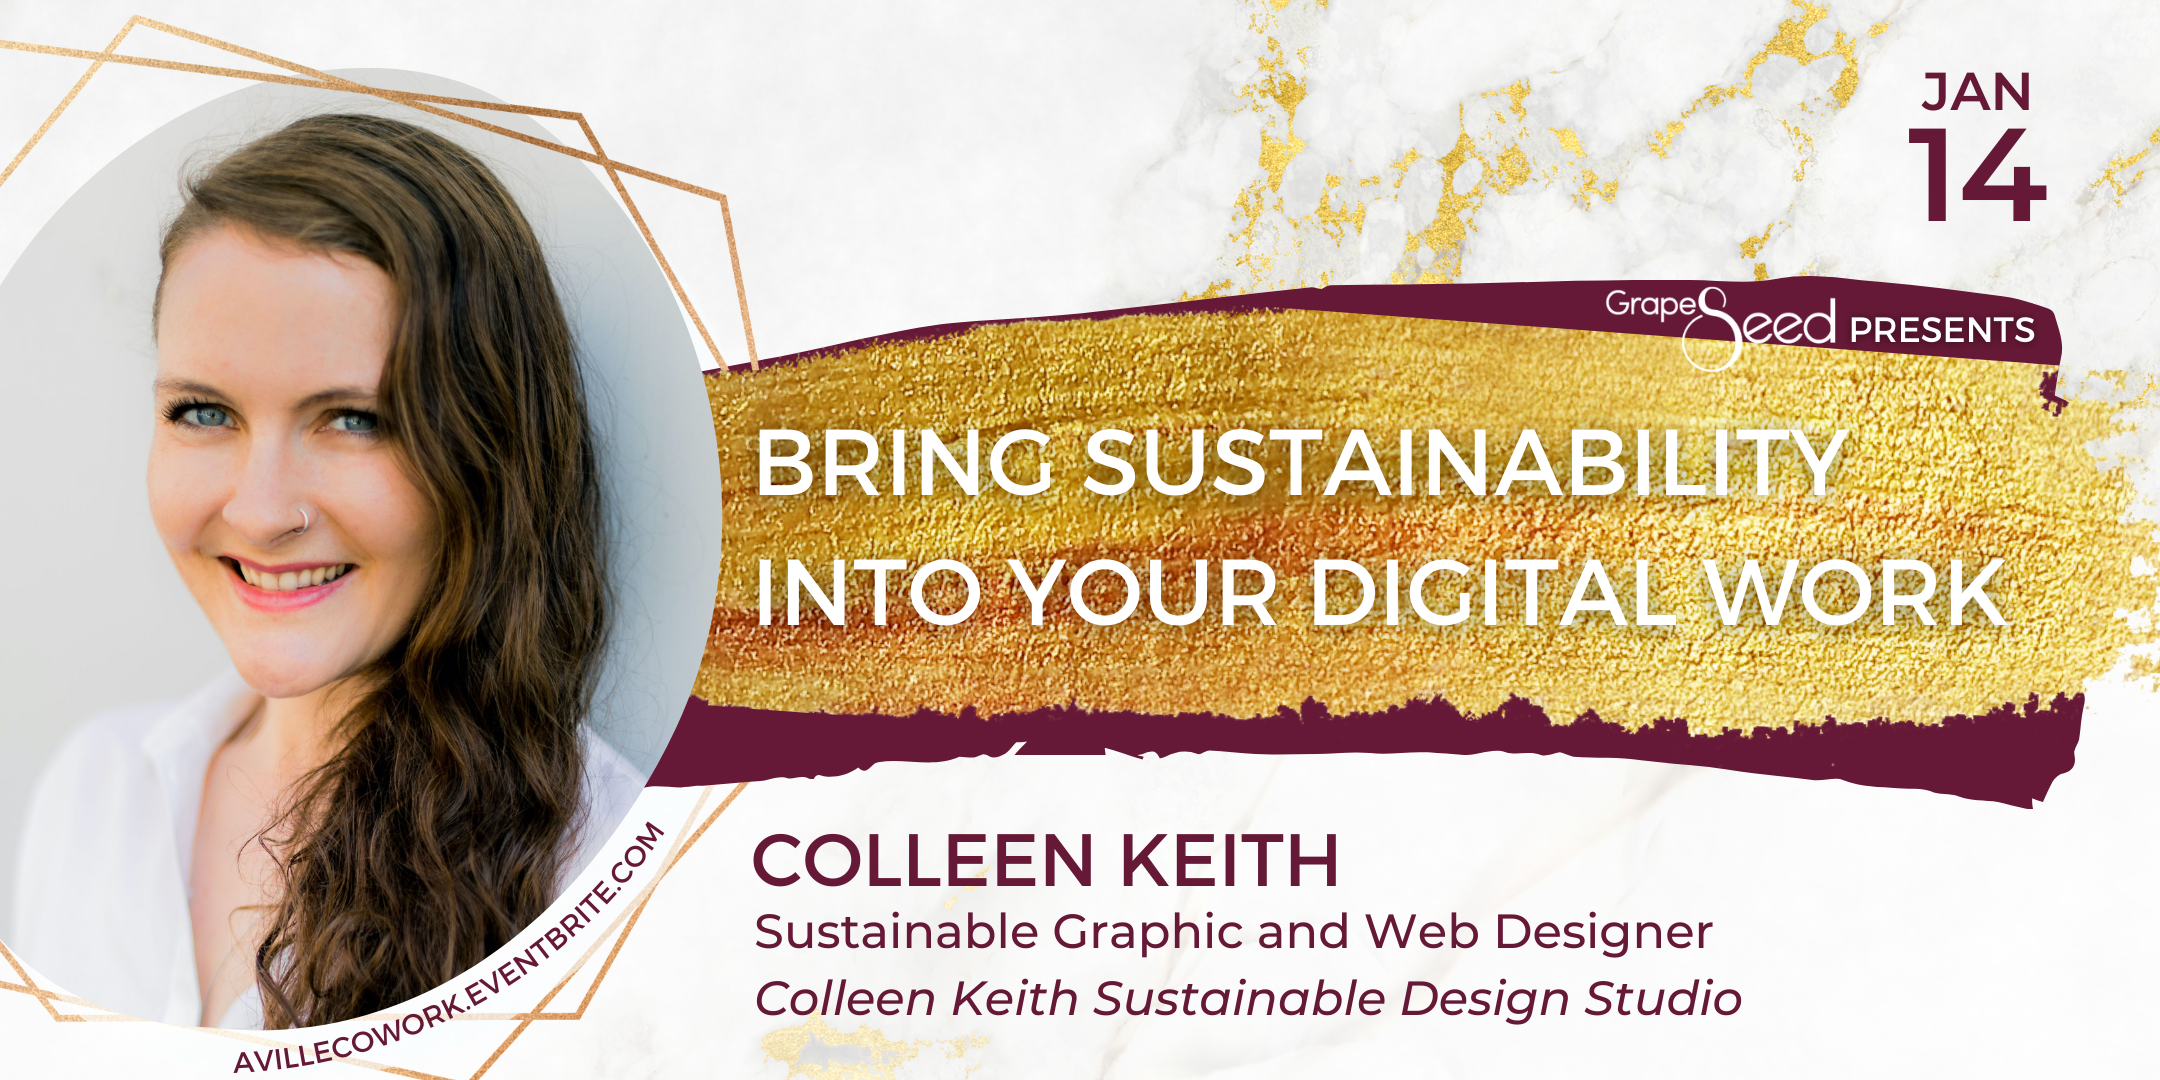 Lunch & Learn banner — Bring Sustainability to Your Digital Work with Colleen Keith on January 14.